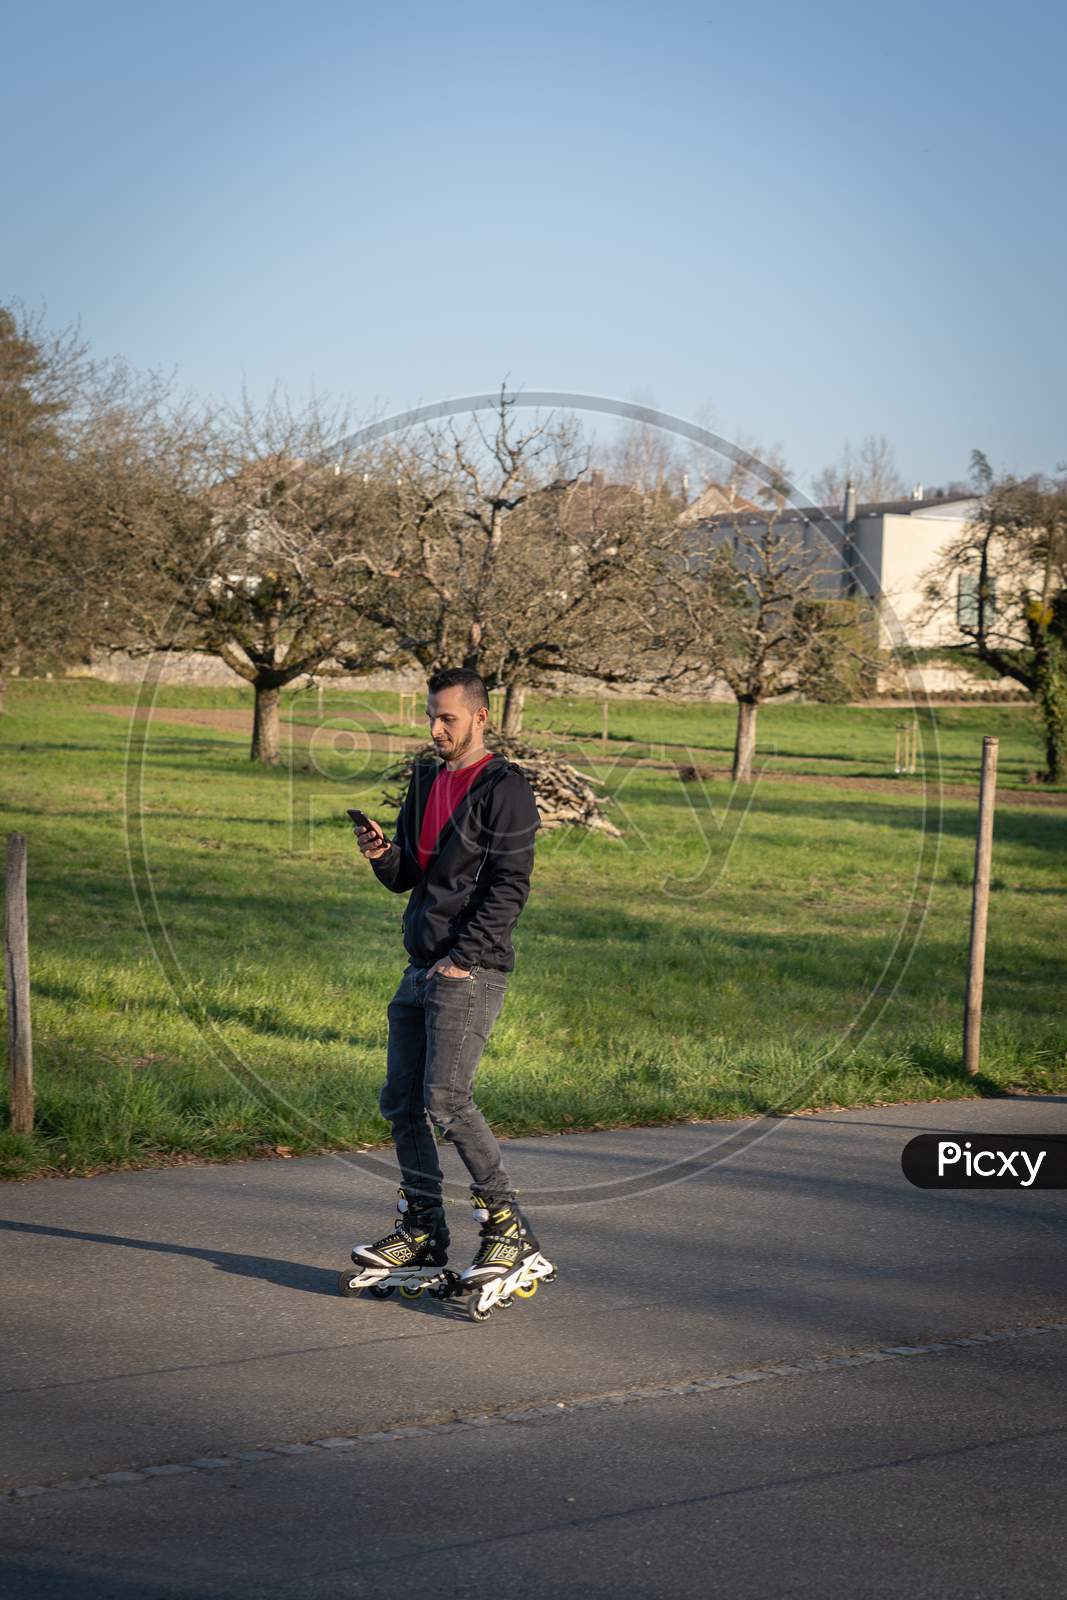 Young Man On Roller Blade Looking At His Phone. Technologie In Nature.